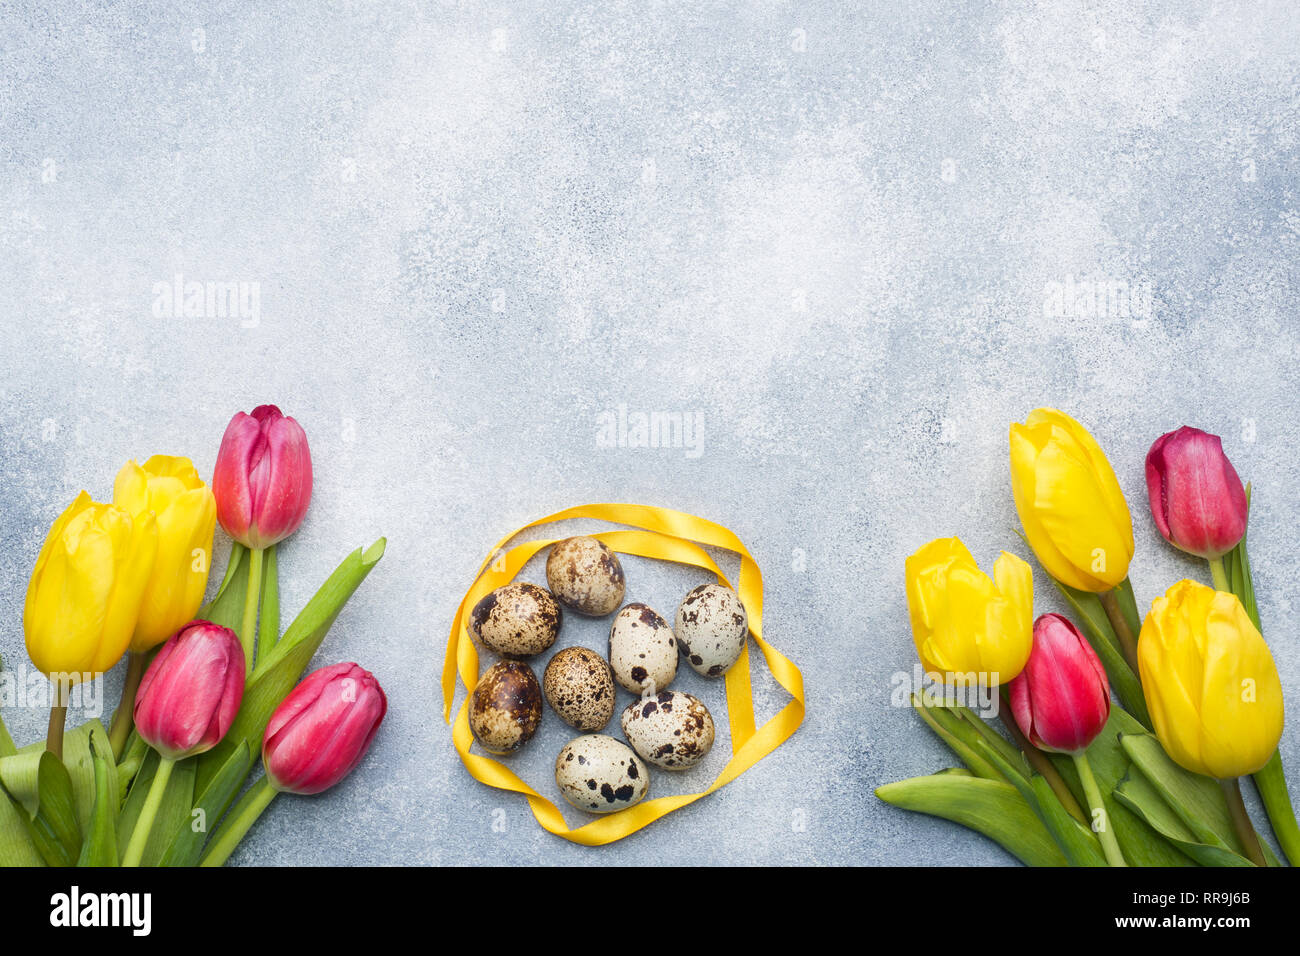 Bright flowers tulips and quail eggs on stone background. Spring and Easter holiday concept with copy space. Stock Photo